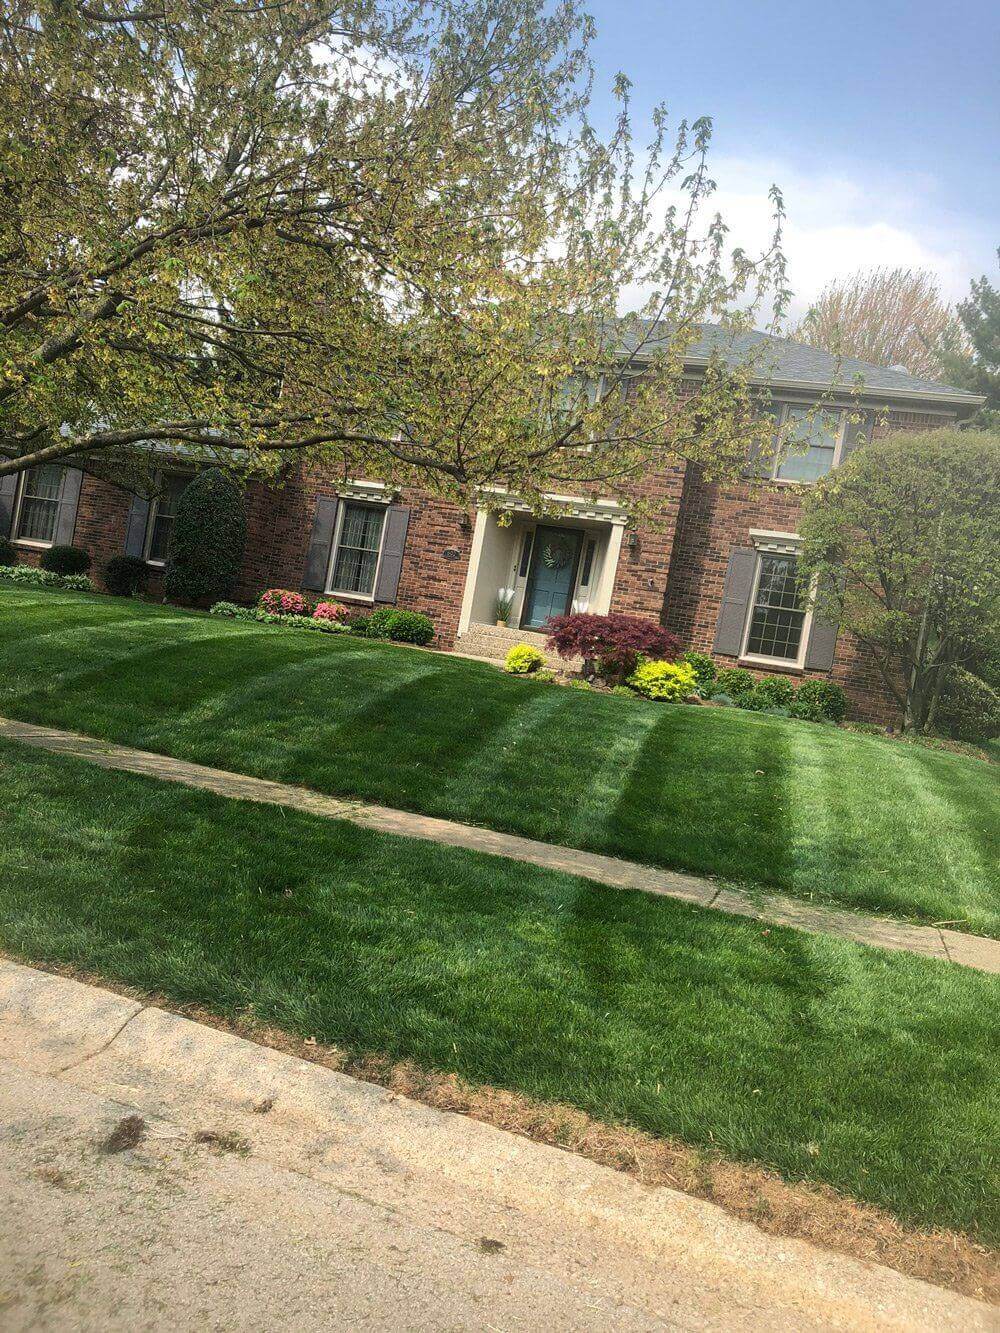 A freshly manicured lawn at a two story brick house